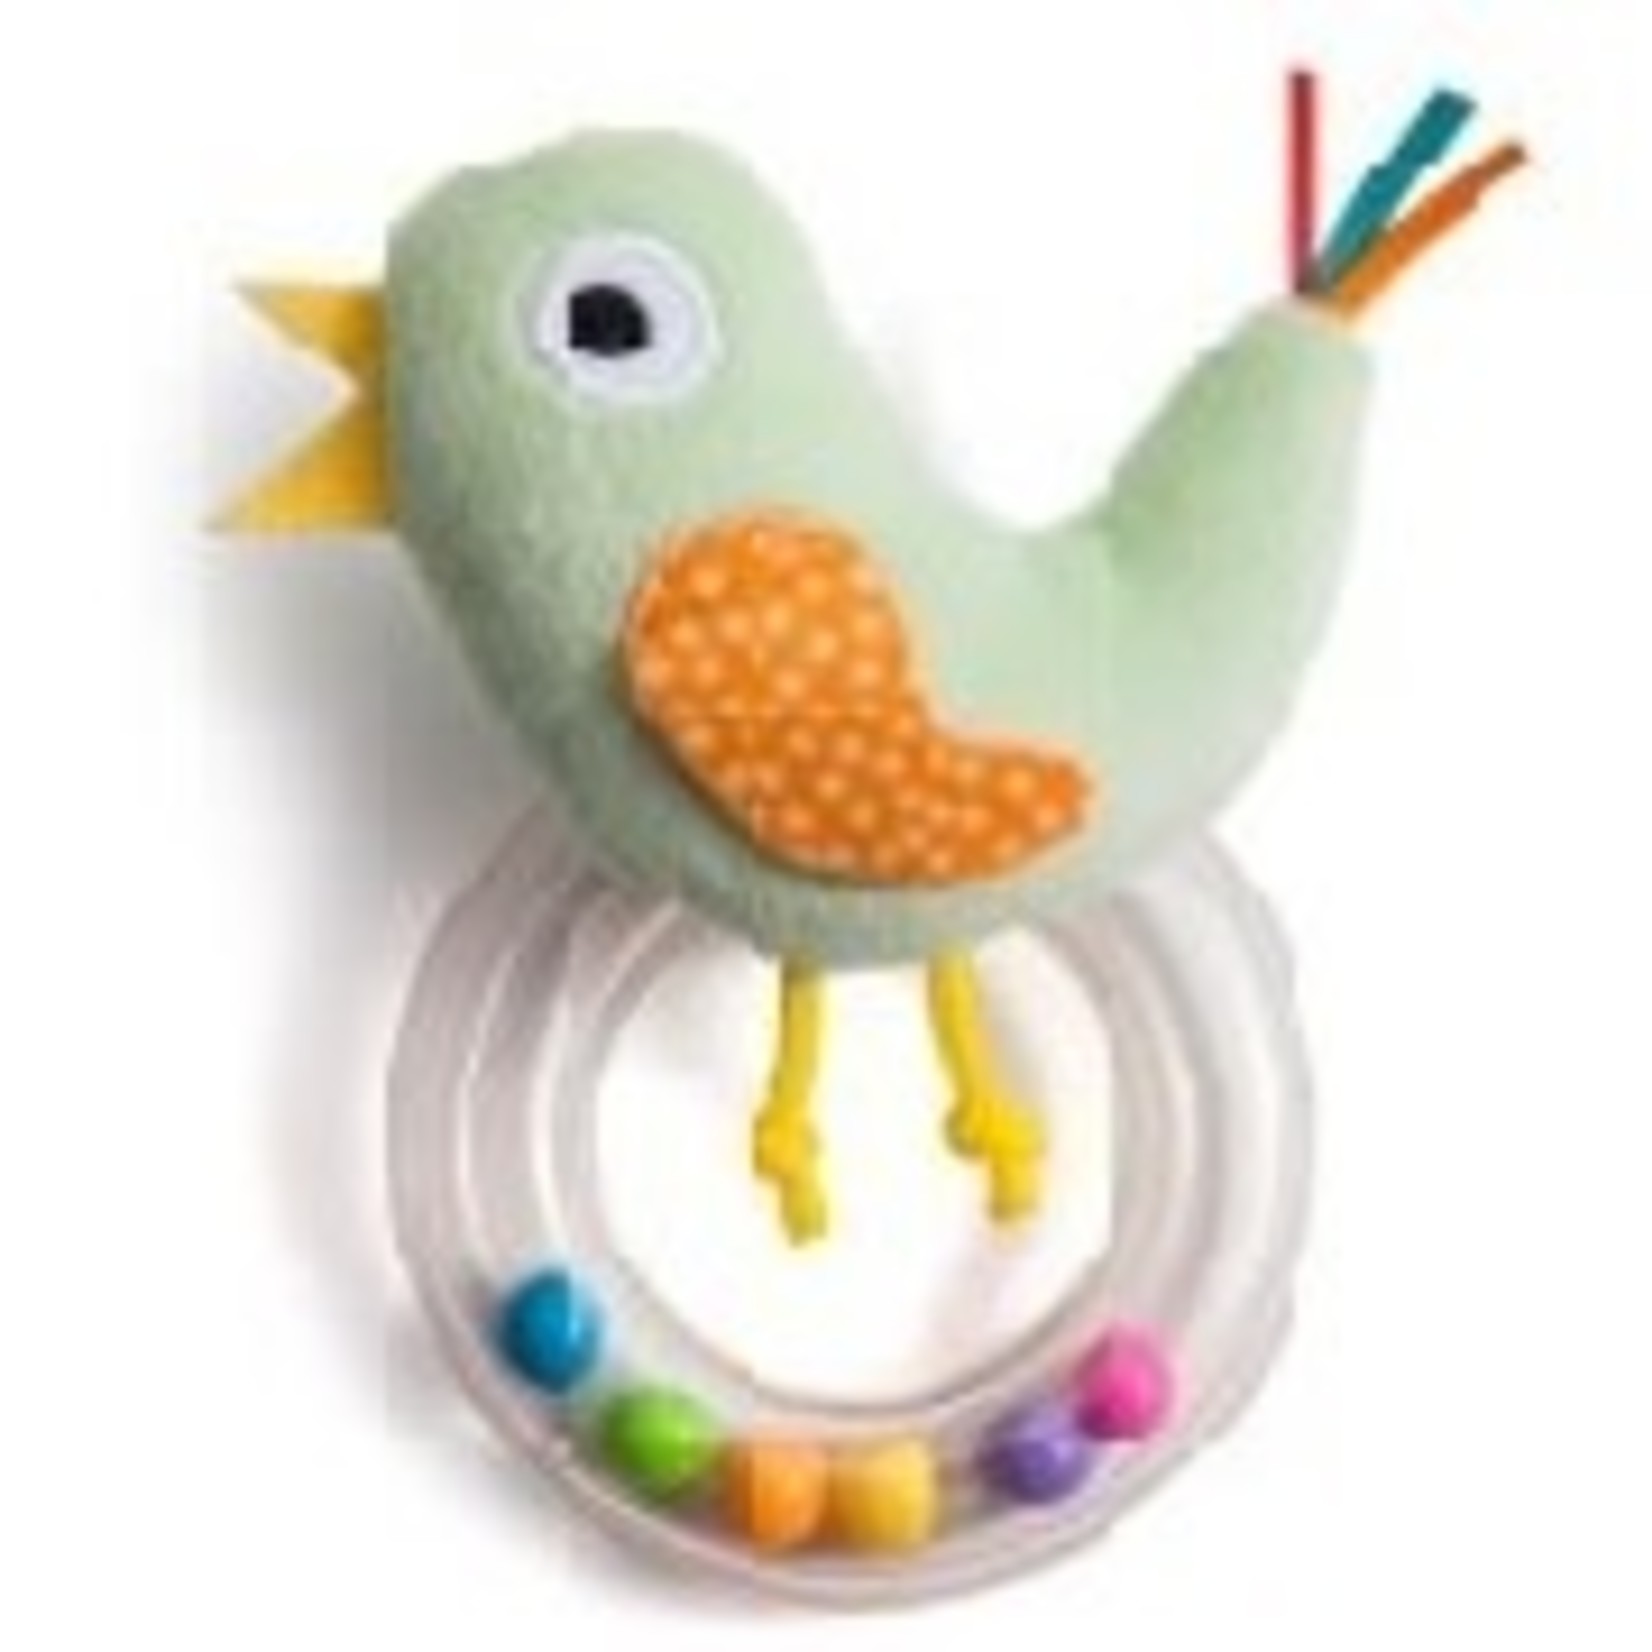 Taf Toys Rattles Cheeky Chick Rattle